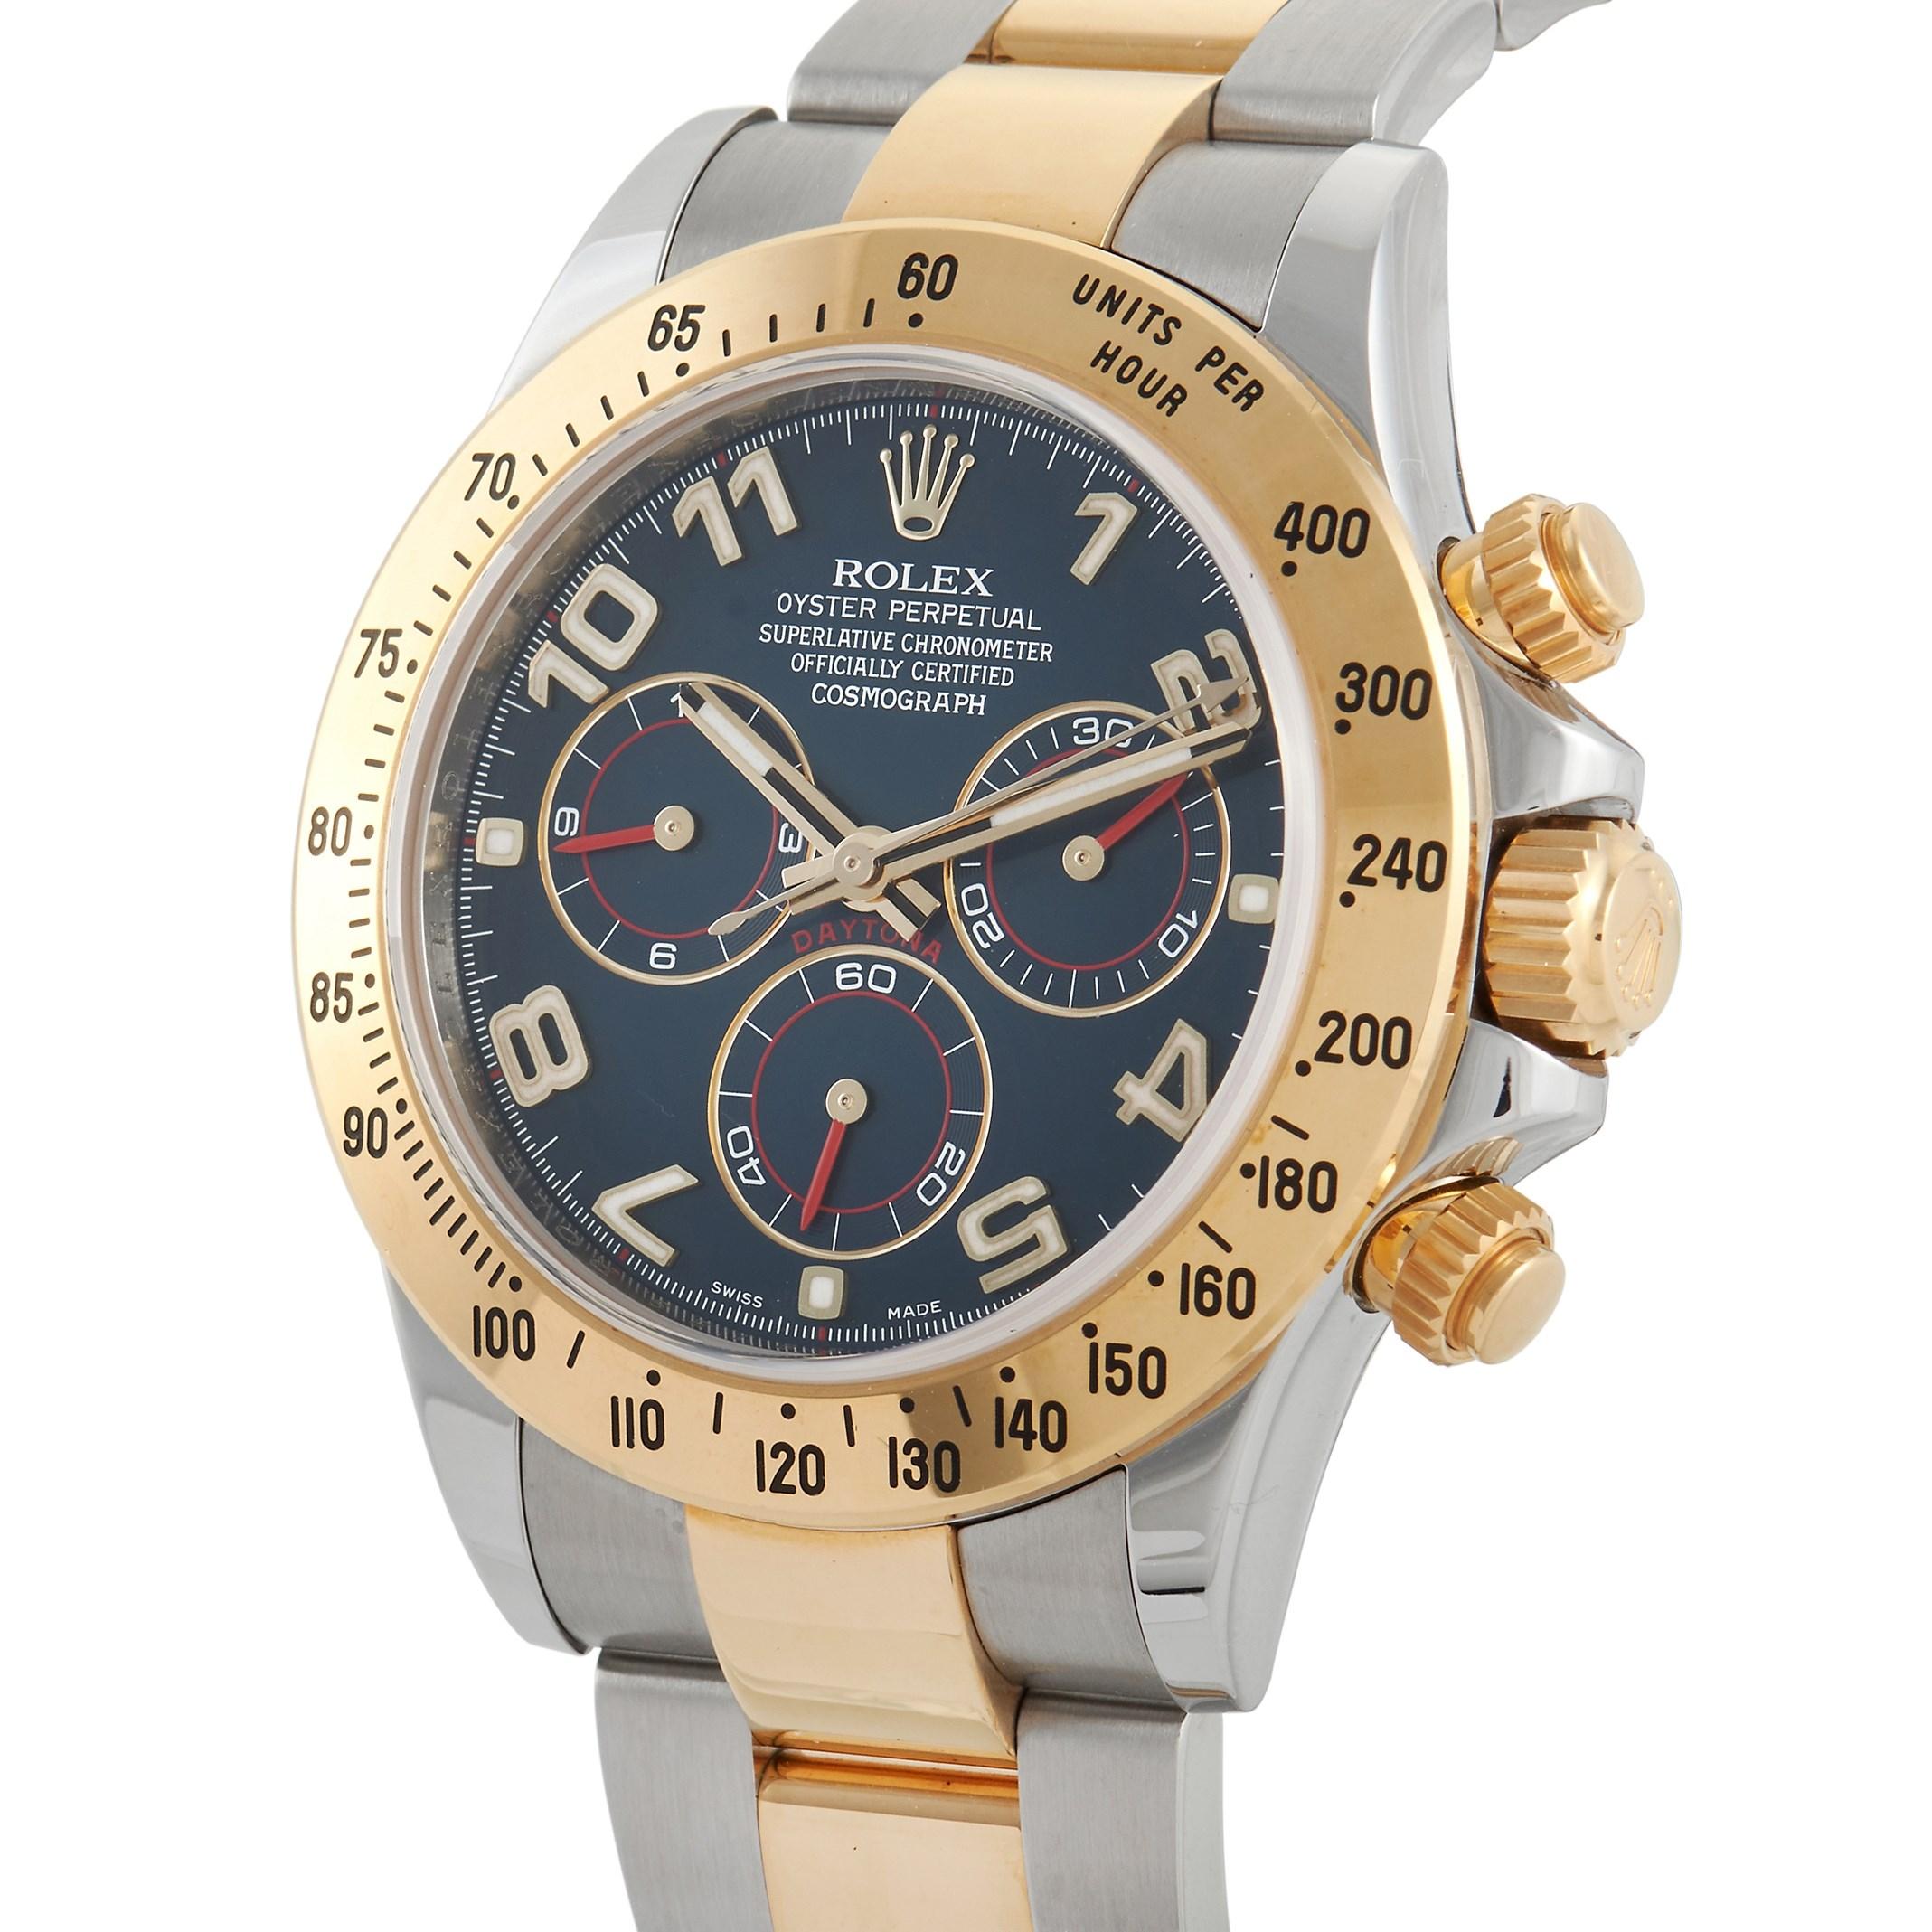 A robust tool watch with a statement-making appeal, the Rolex Cosmograph Daytona 116523 with blue dial is indeed a covetable timepiece. This watch comes with a two-toned profile. It has 40mm stainless steel case and a fixed 18K yellow gold domed